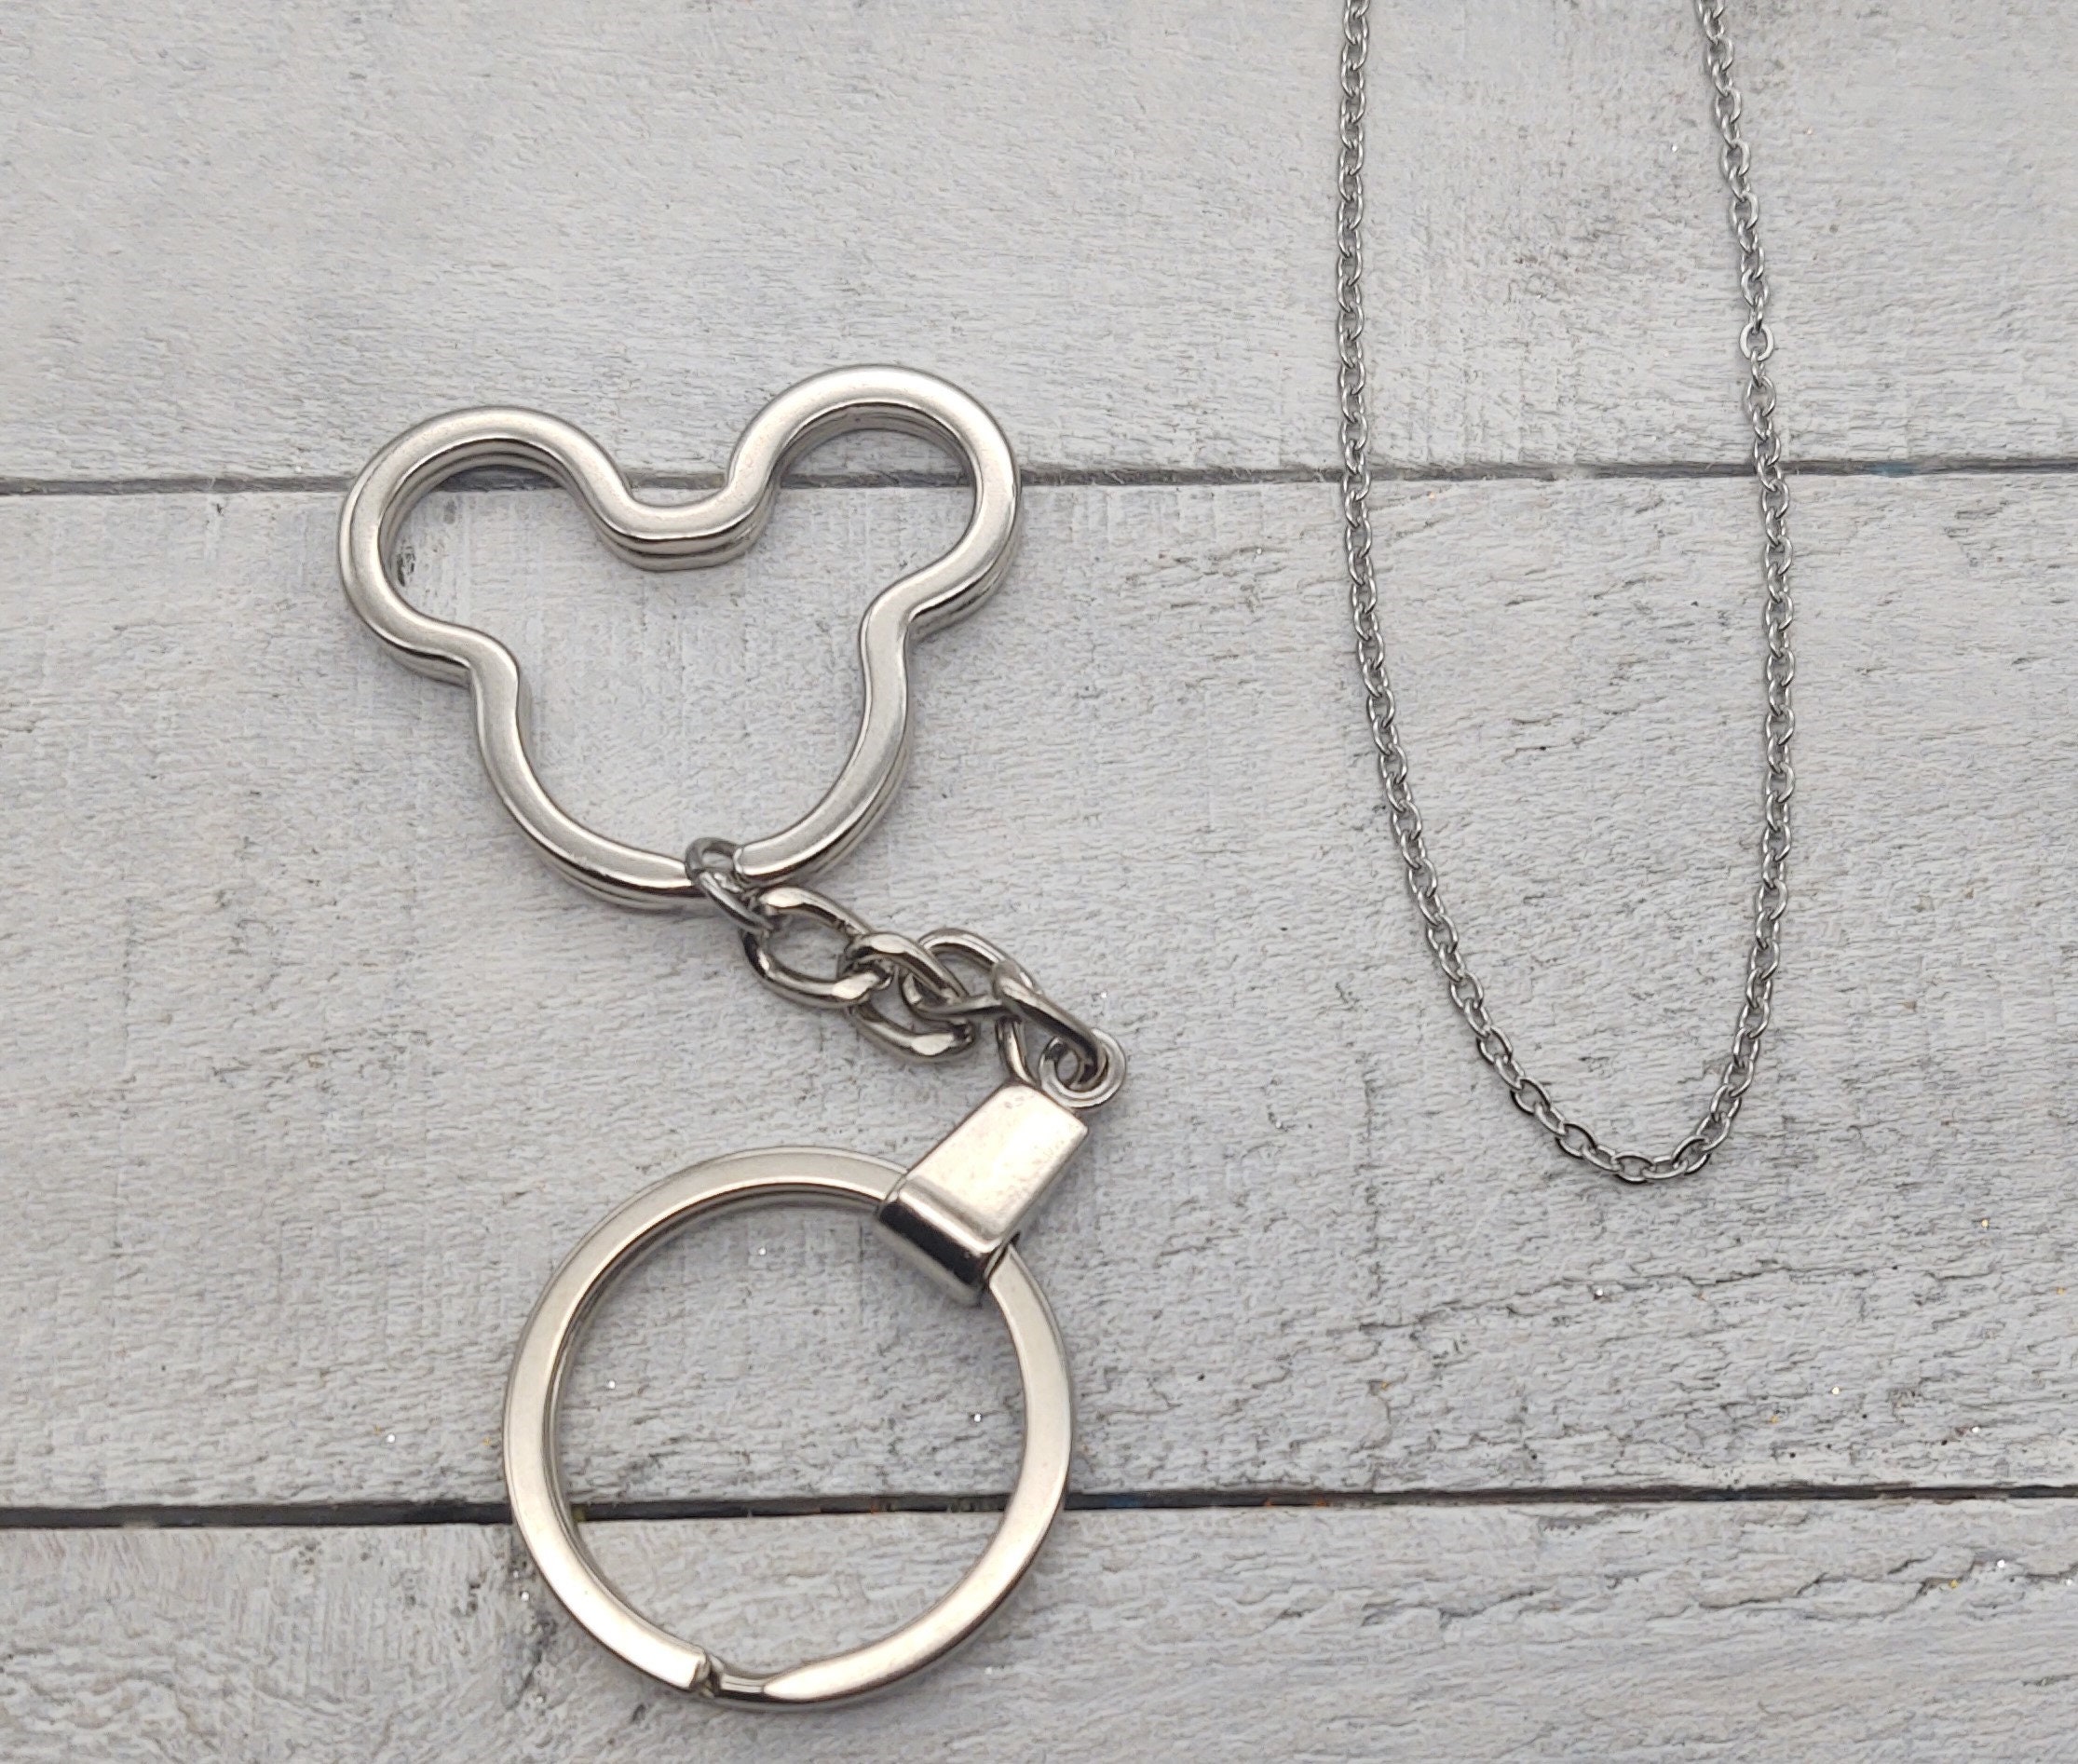 Brand New Super Cute Lv Minnie Mouse Keychain for Sale in Redondo